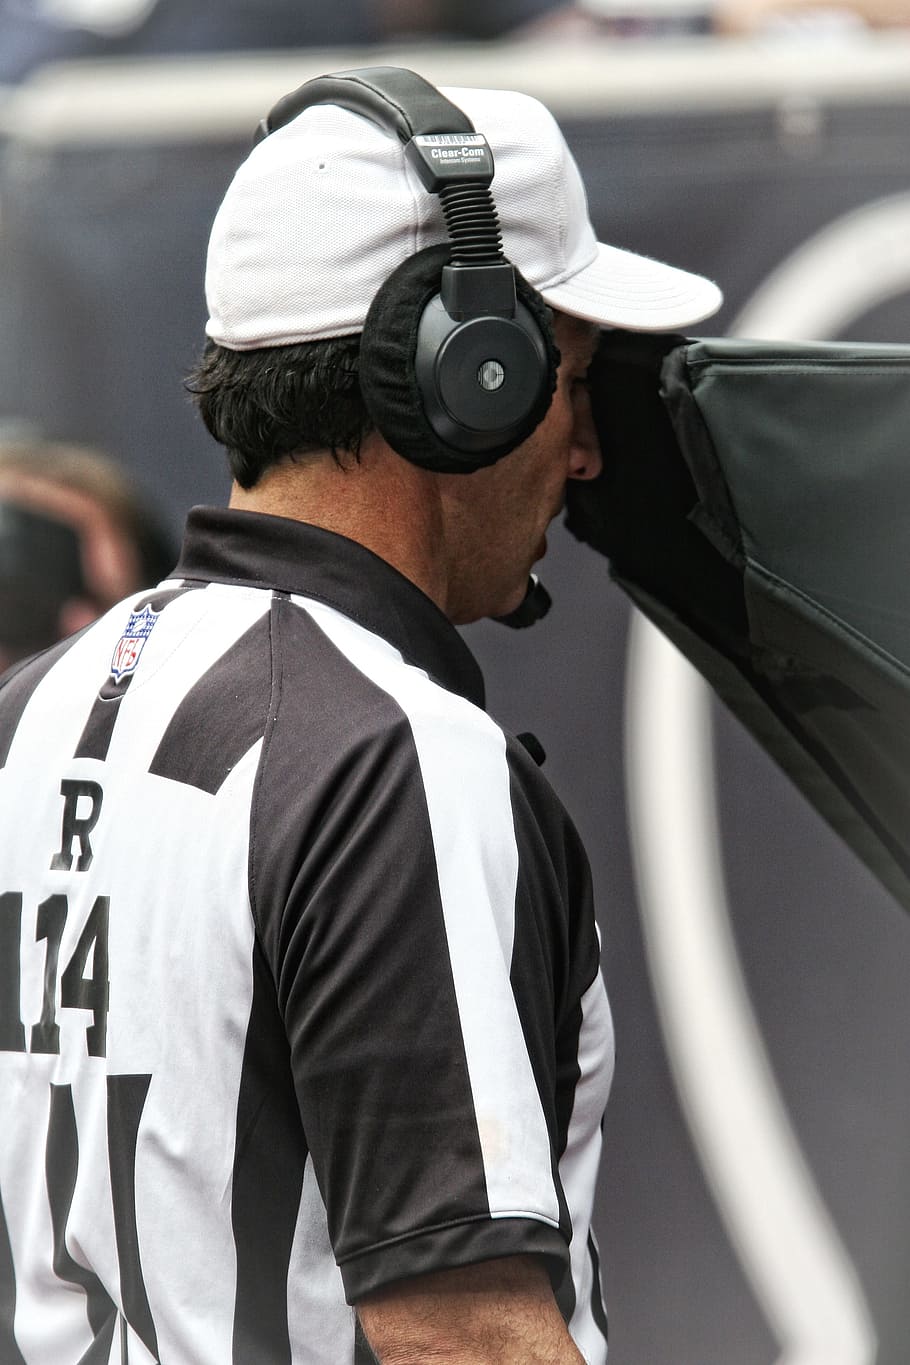 Referee, Nfl, Instant Replay, Game, instant replay, game, american, football, sport, man, uniform